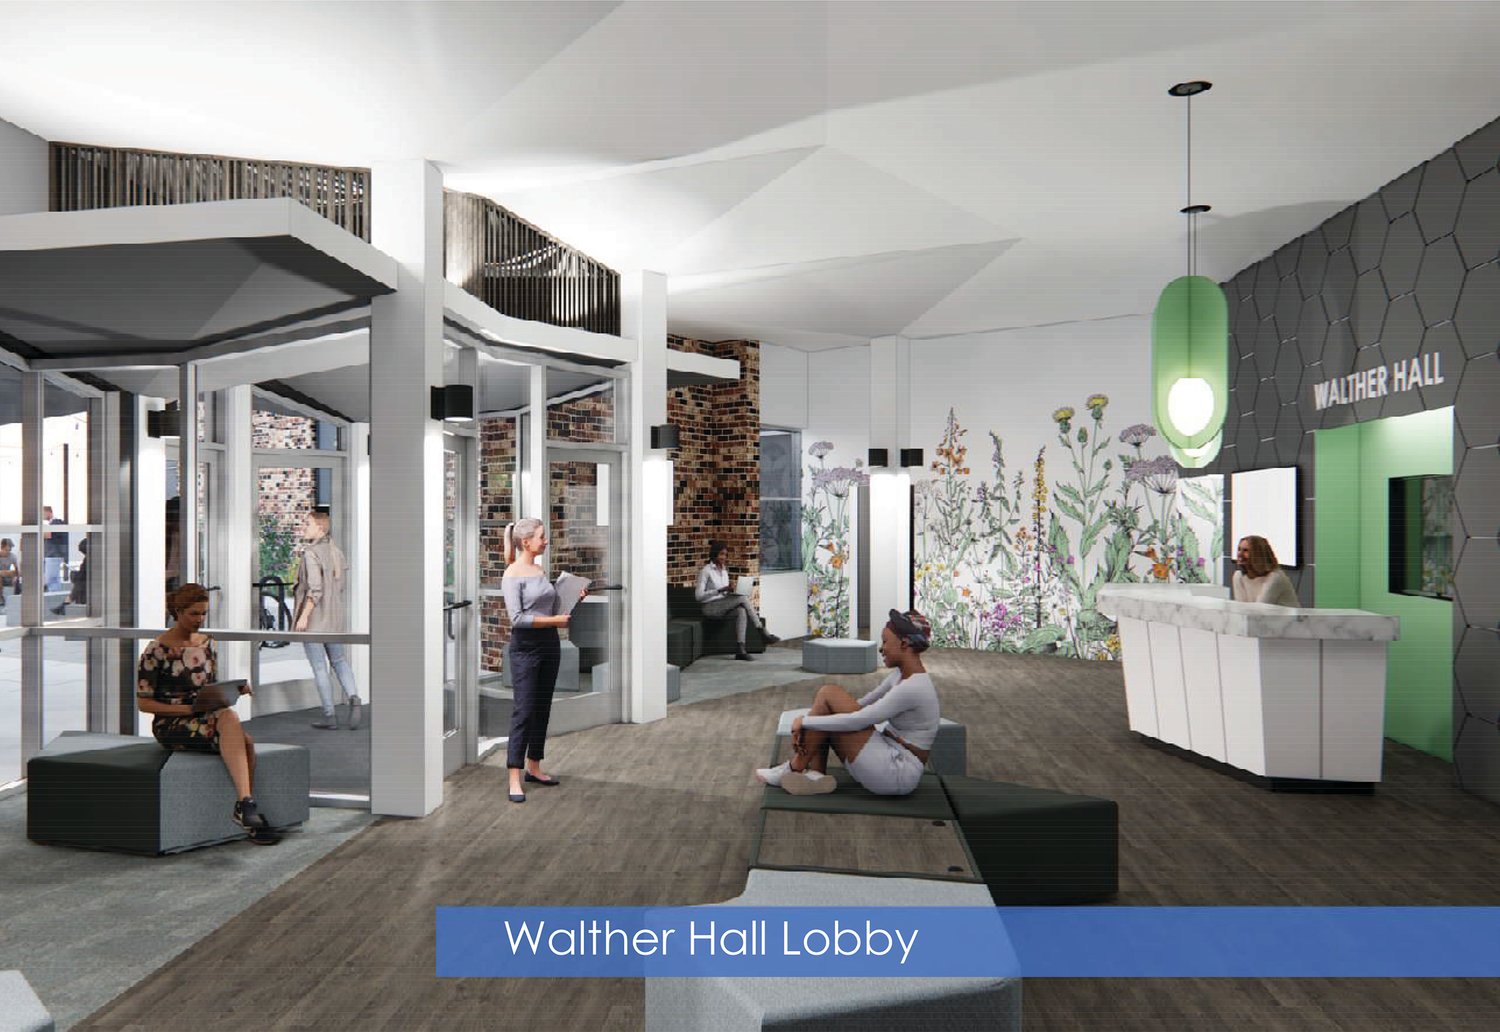 New lobby spaces are part of the renovation plans.